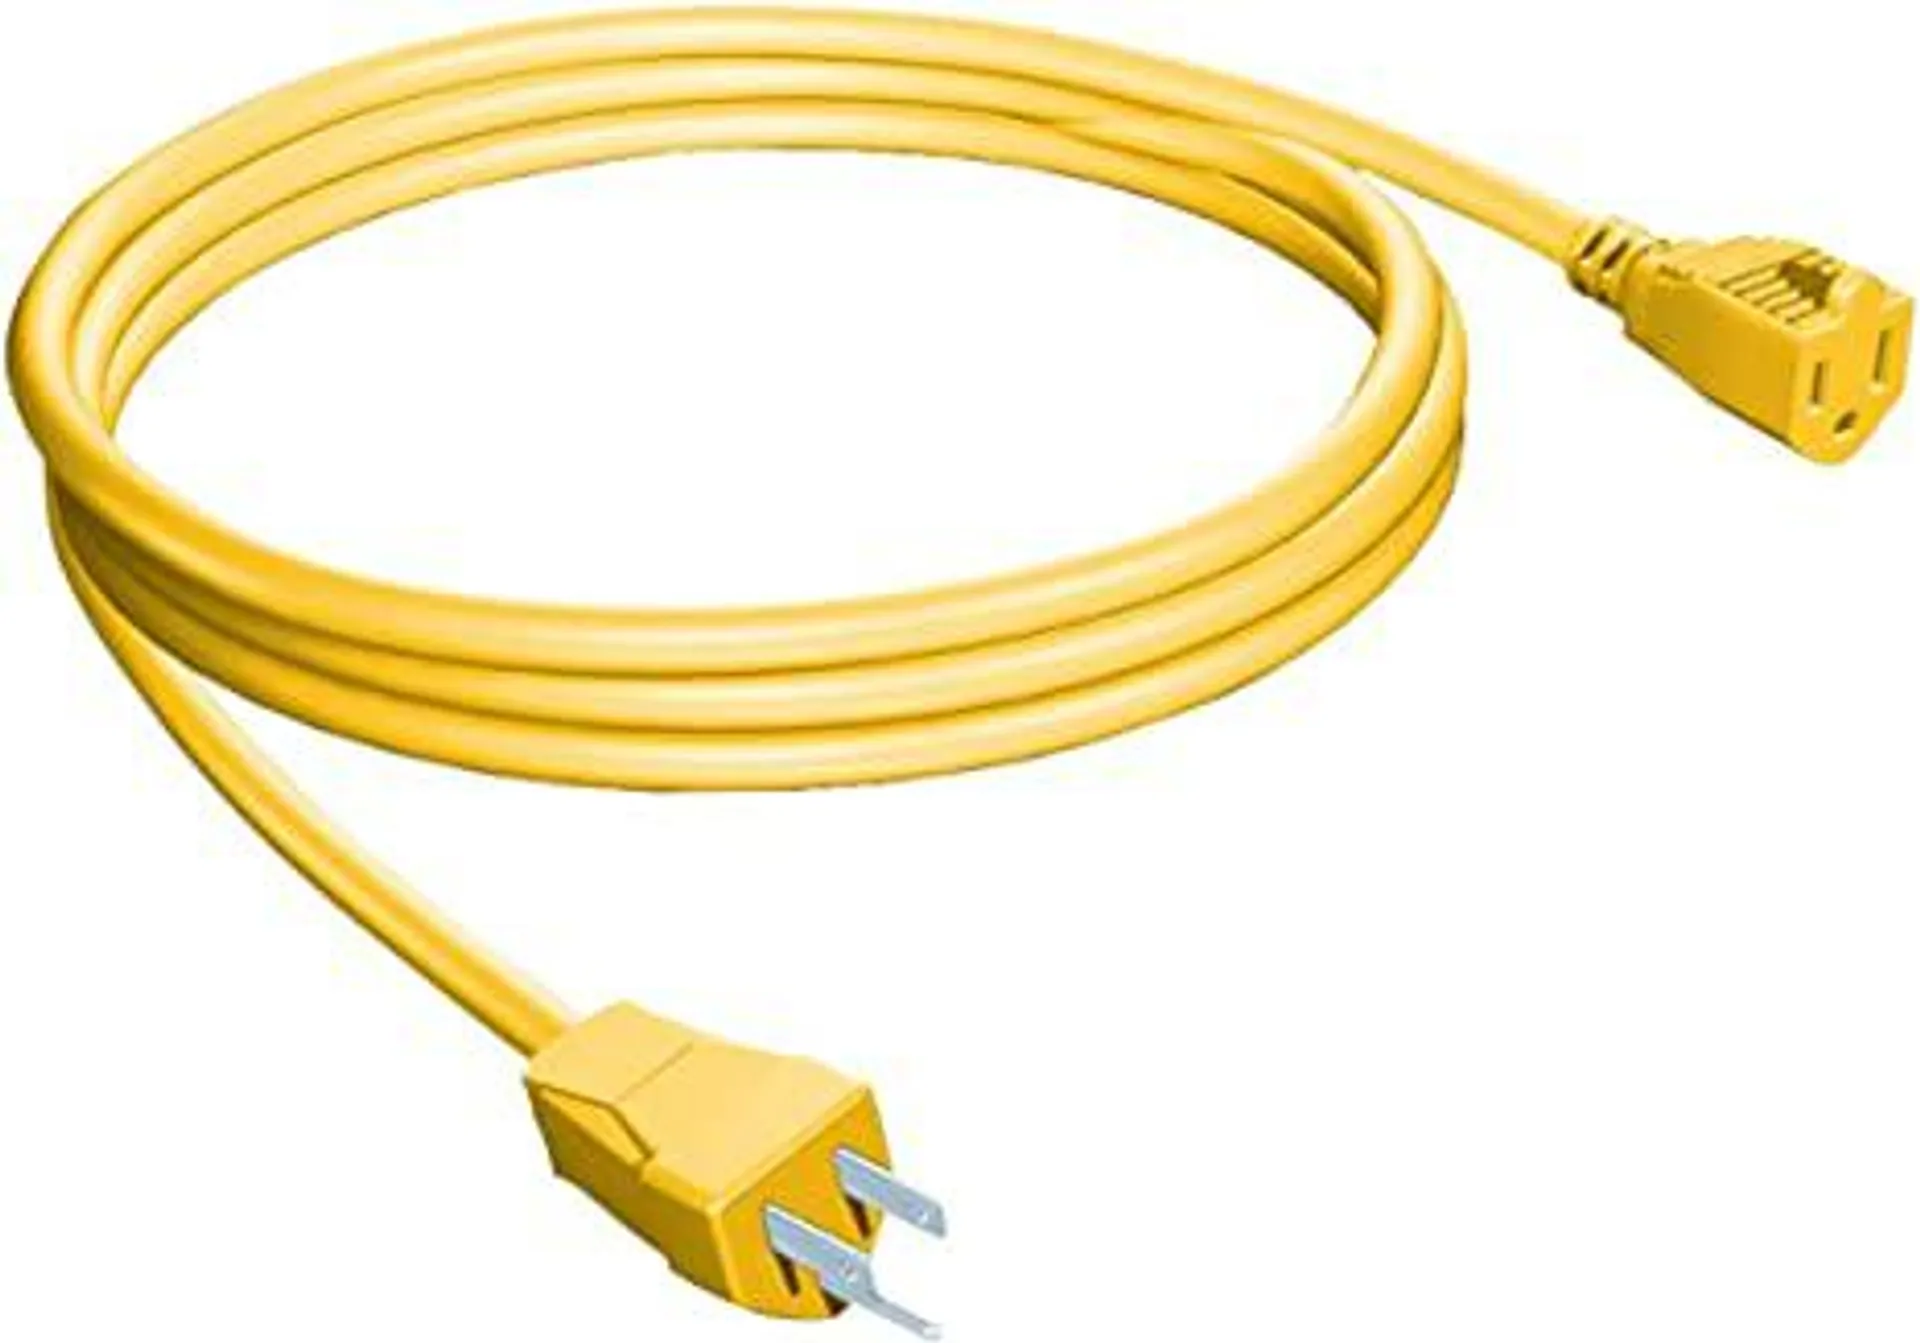 Stanley 33157 Grounded Outdoor Extension Power Cord, 15-Feet, Yellow